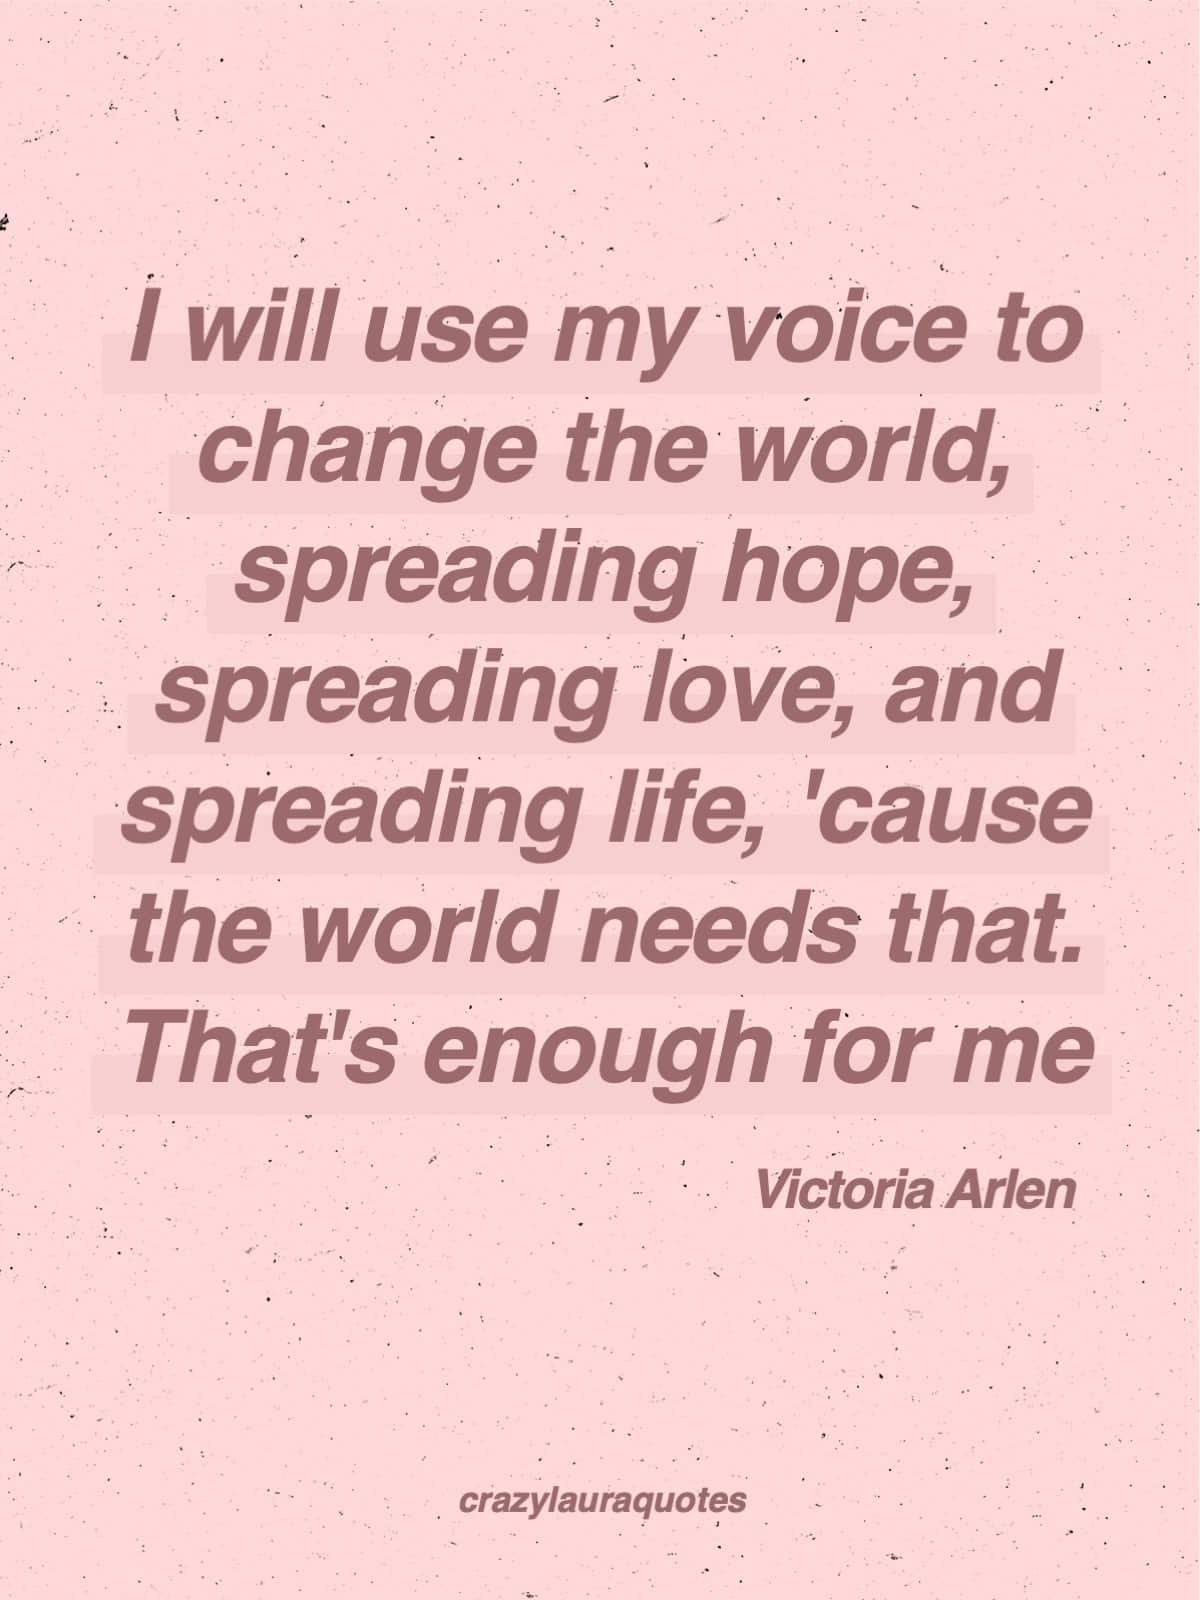 change the world and spread love quote